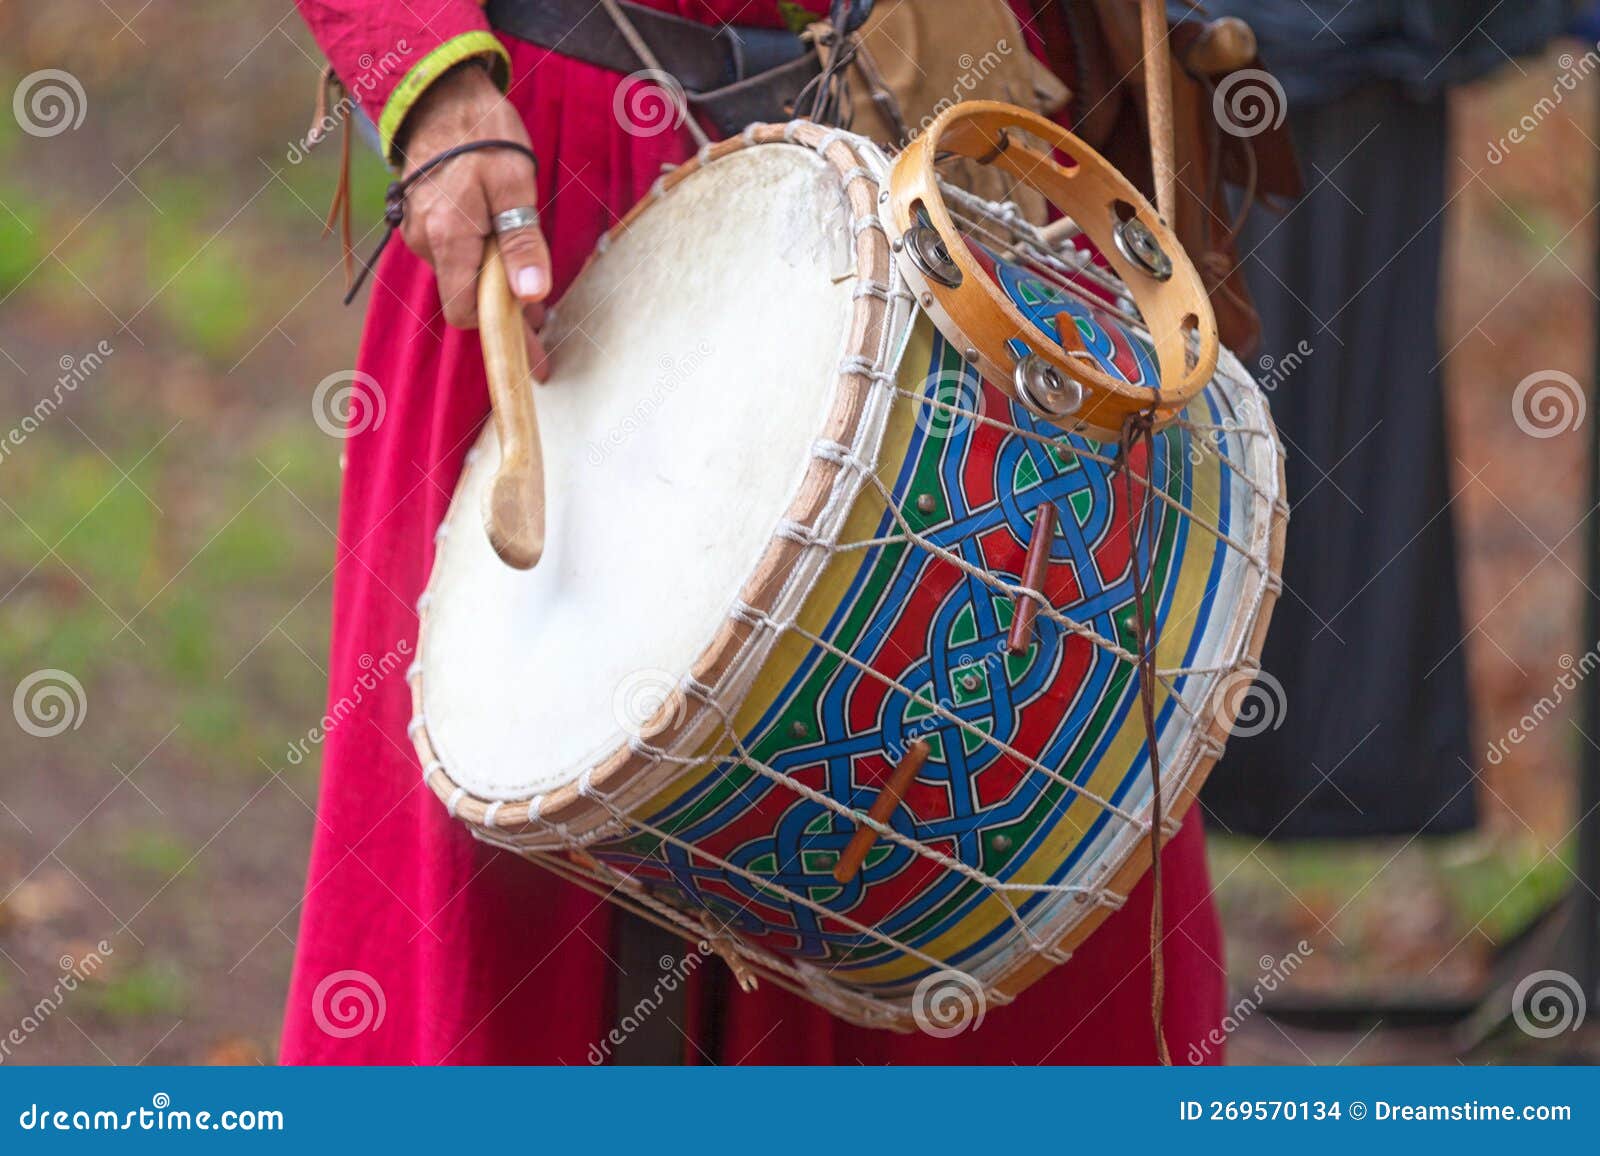 Medieval Minstrel Playing Drum Stock Photo - Image of costume, autumn